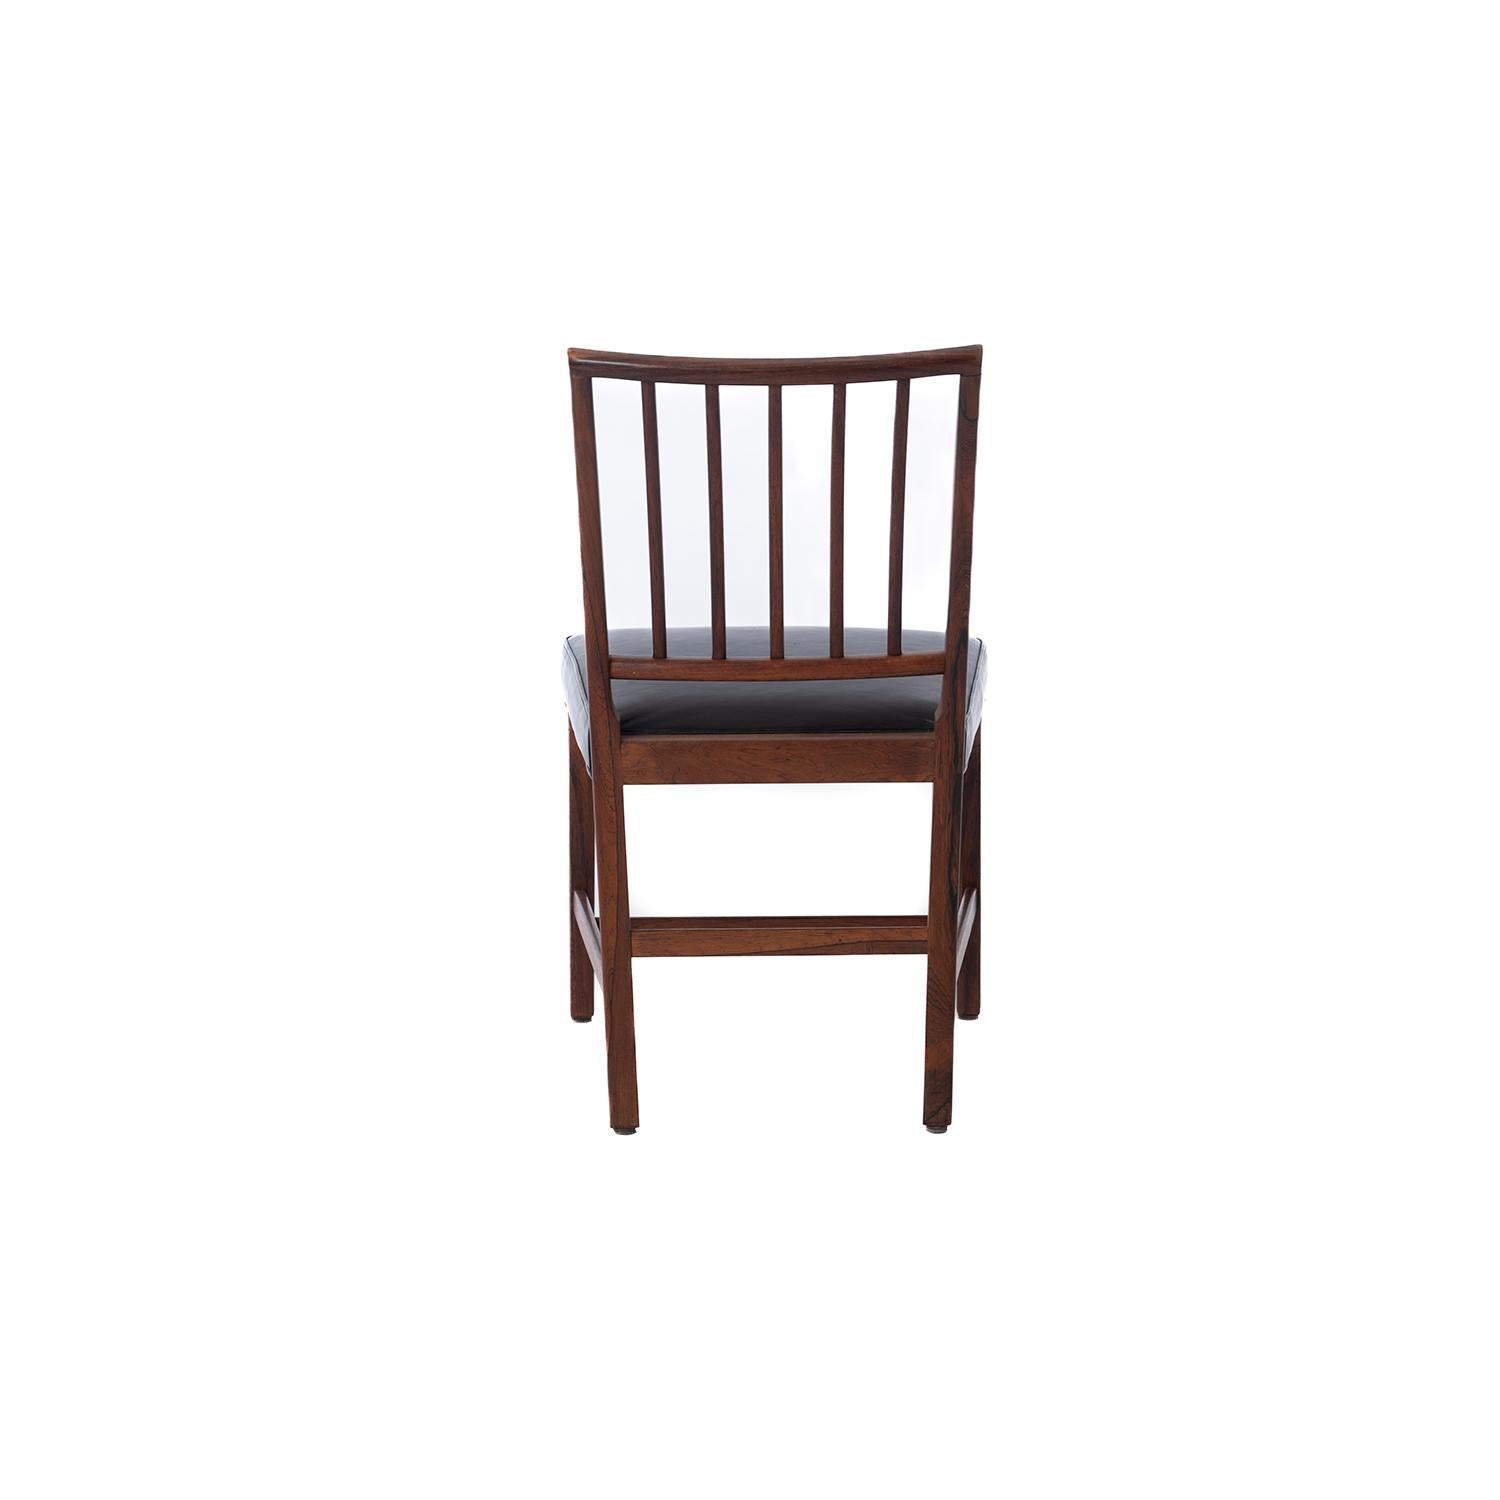 Rosewood Jacob Kjaer Grand Prix Paris Dining Chairs For Sale